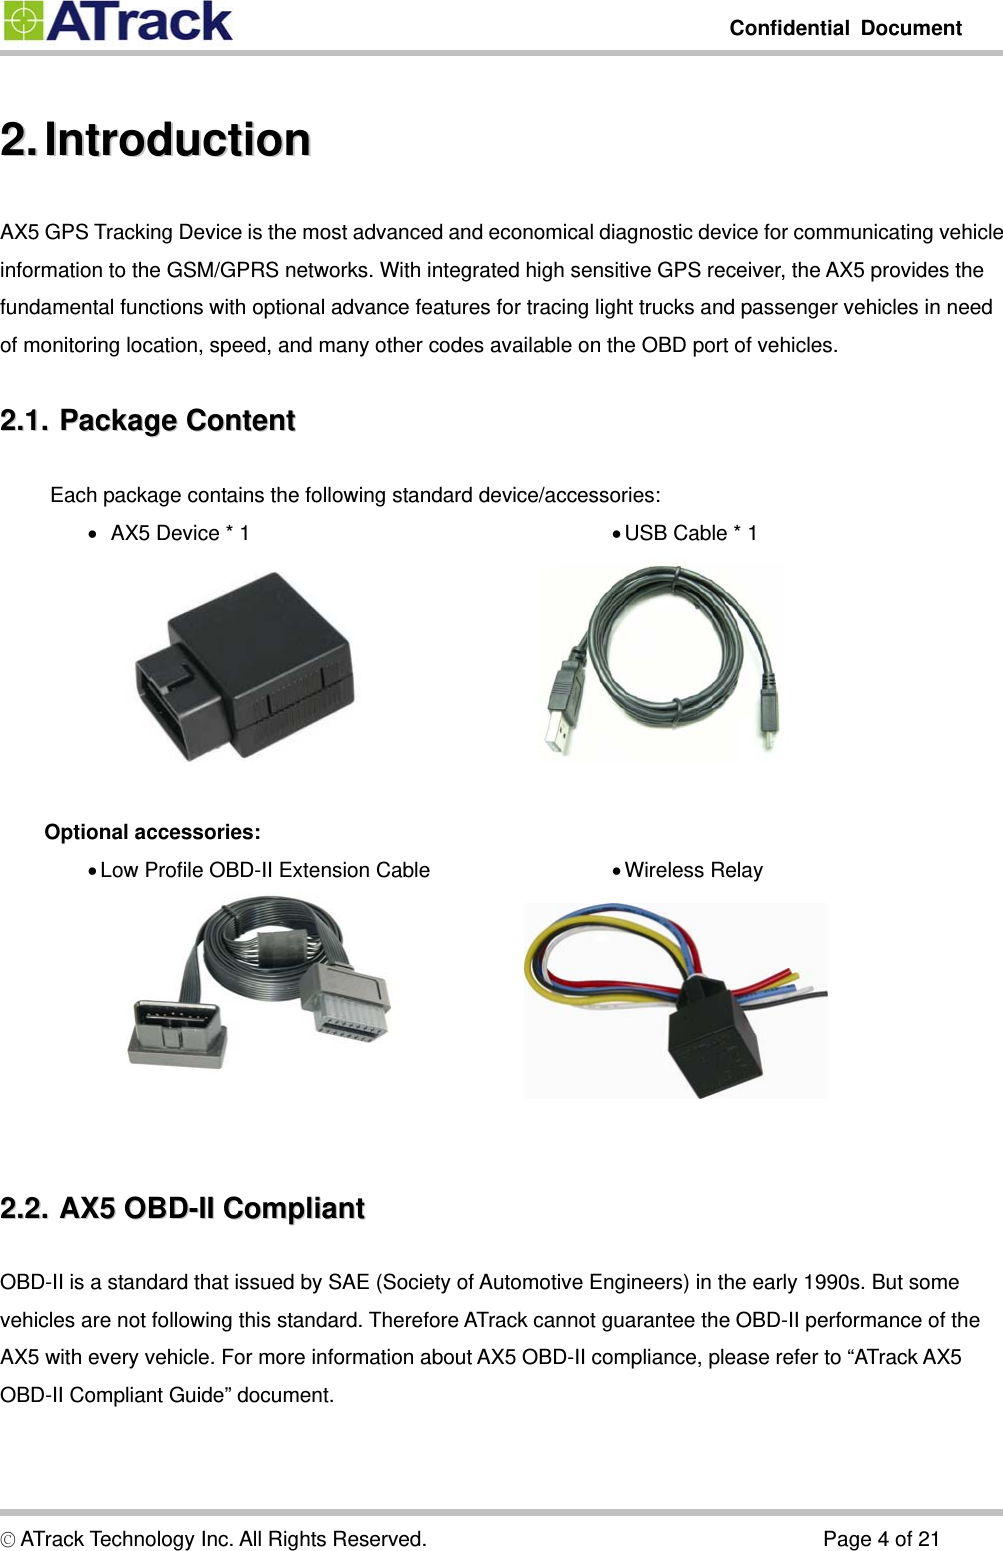         Confidential Document  © ATrack Technology Inc. All Rights Reserved.                                      Page 4 of 21 2.2.  Introduction  IntroductionAX5 GPS Tracking Device is the most advanced and economical diagnostic device for communicating vehicle information to the GSM/GPRS networks. With integrated high sensitive GPS receiver, the AX5 provides the fundamental functions with optional advance features for tracing light trucks and passenger vehicles in need of monitoring location, speed, and many other codes available on the OBD port of vehicles. 2.1.2.1.  Package  Content  Package ContentEach package contains the following standard device/accessories: •   AX5 Device * 1  • USB Cable * 1     Optional accessories: • Wireless Relay • Low Profile OBD-II Extension Cable      2.2.2.2.  AX5  OBD-II  Compliant  AX5 OBD-II CompliantOBD-II is a standard that issued by SAE (Society of Automotive Engineers) in the early 1990s. But some vehicles are not following this standard. Therefore ATrack cannot guarantee the OBD-II performance of the AX5 with every vehicle. For more information about AX5 OBD-II compliance, please refer to “ATrack AX5 OBD-II Compliant Guide” document.  